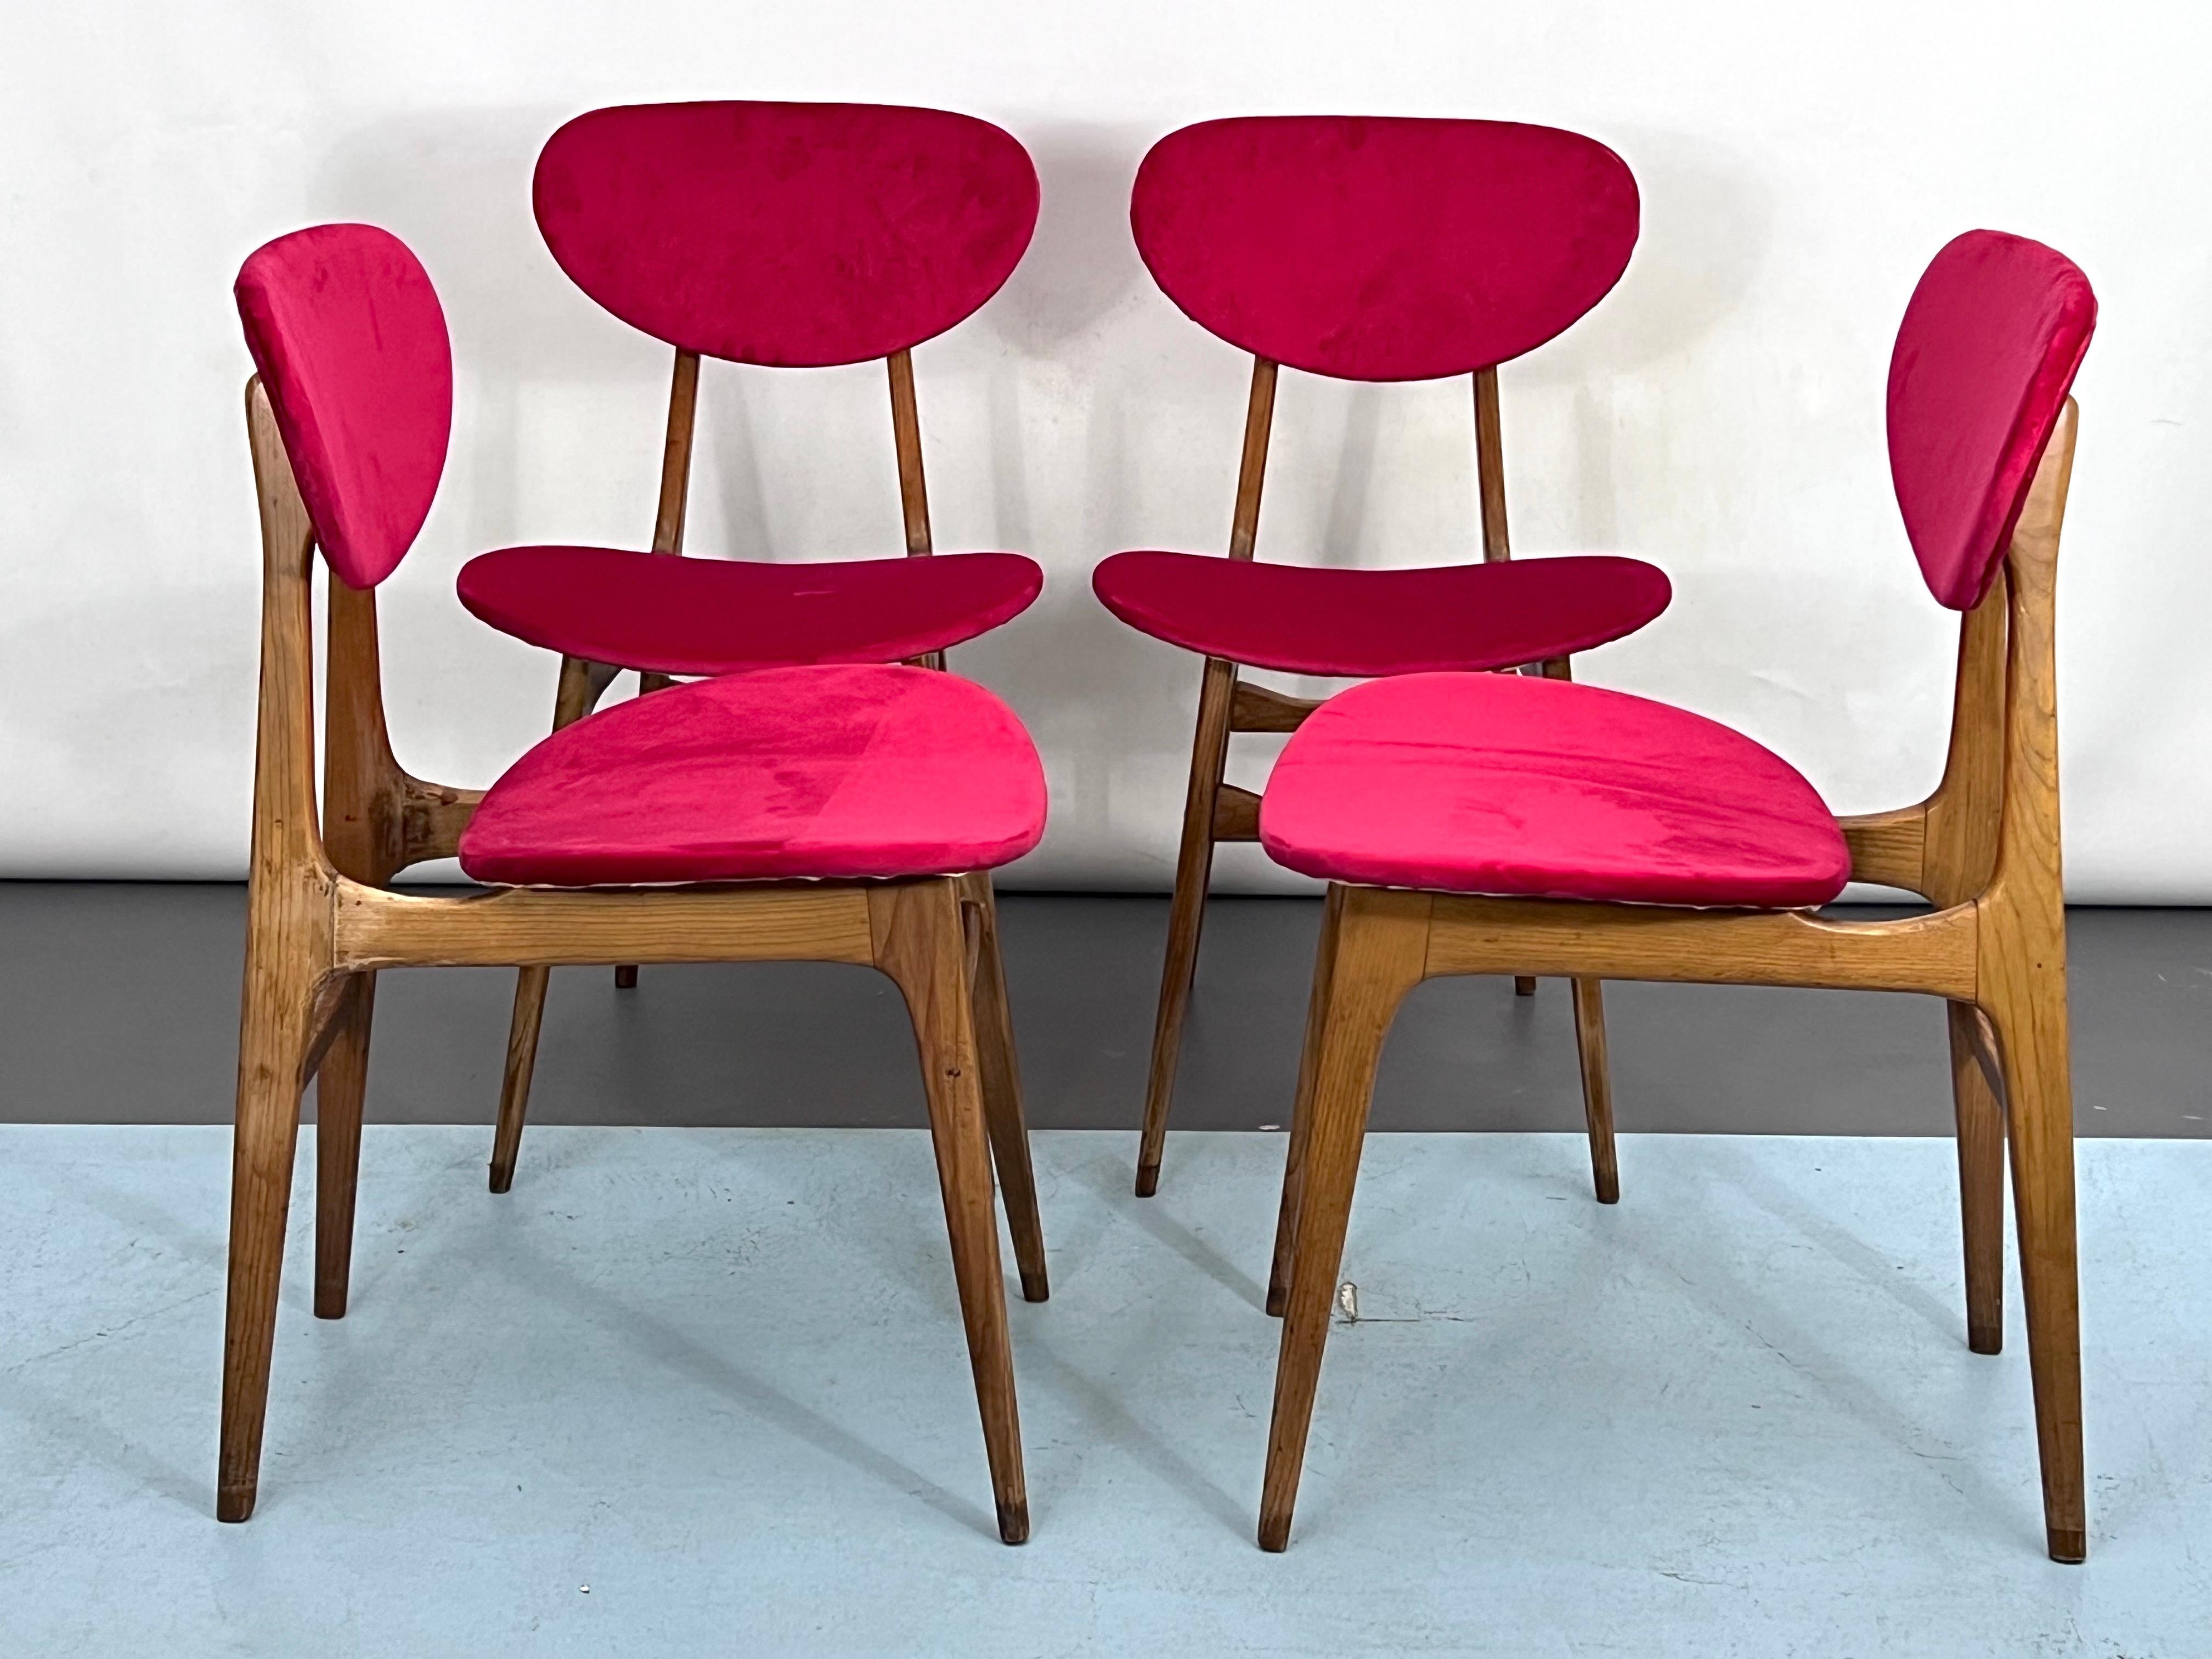 20th Century Mid-Century Set of Four Red Velvet and Wood Dining Chairs, Italy, 1950s For Sale